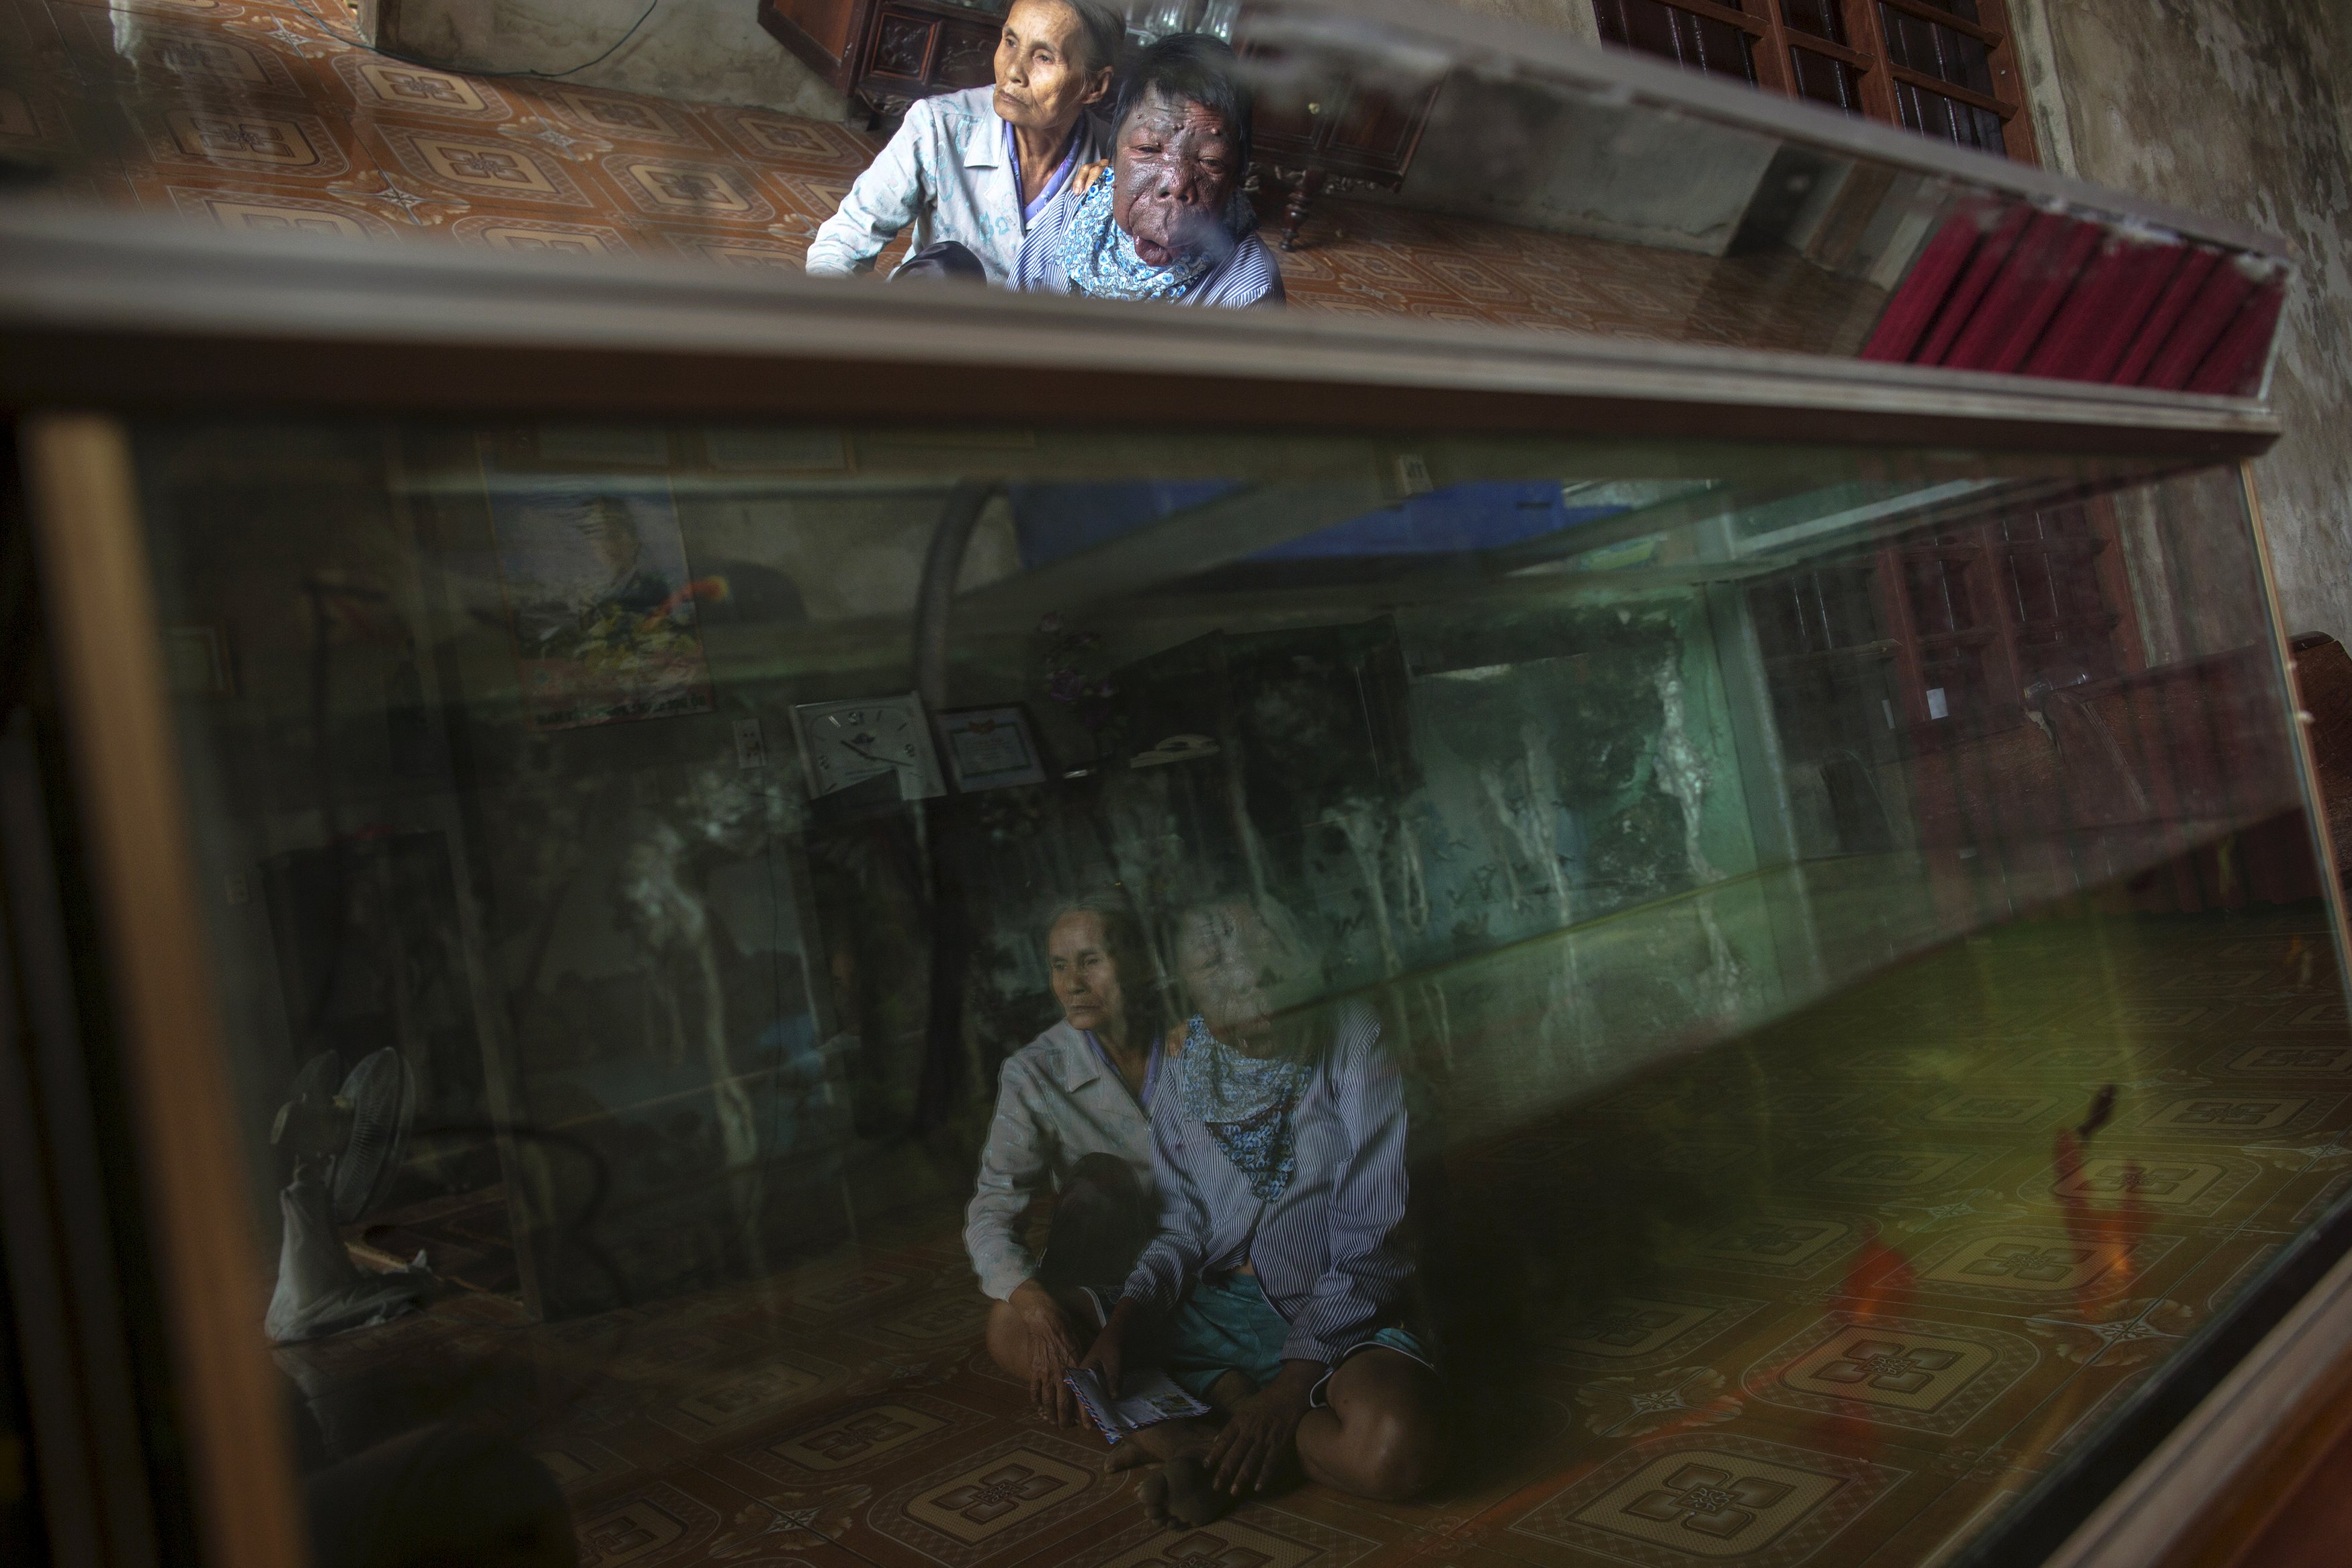 Dang Thi Quang and her son Nguyen Van Binh are reflected in an aquarium in their home in Vietnam's Quang Binh province April 11, 2015. Nguyen Van Binh’s father, a soldier who served in the Vietnamese army's transportation unit in the North, travelled and spent time in areas known as hotspots for Agent Orange contamination.